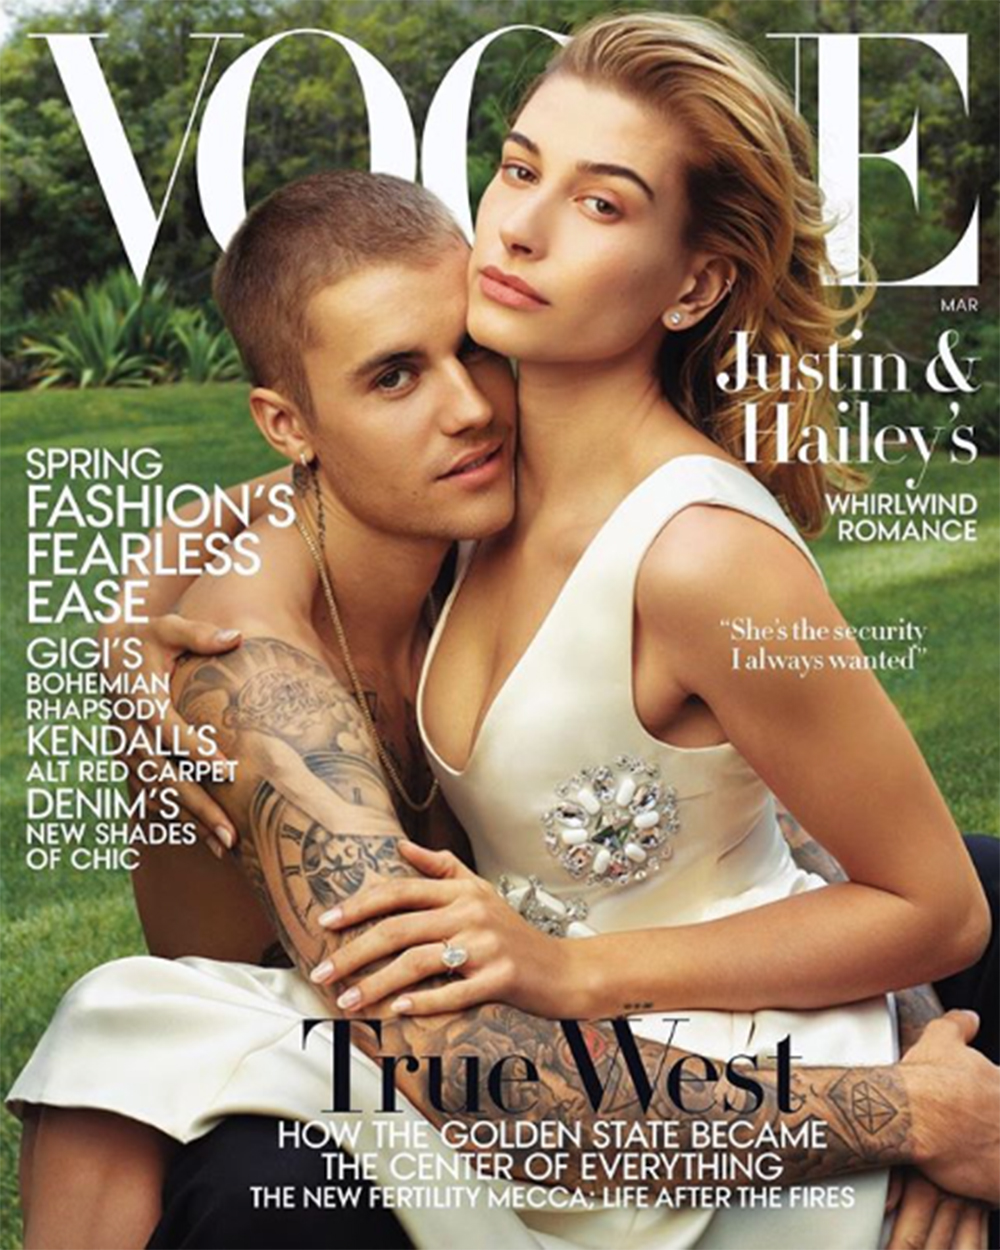 『VOGUE』誌に登場したジャスティン・ビーバー＆ヘイリー・ボールドウィン（画像は『Hailey Rhode Bieber　2019年2月7日付Instagram「so excited to cover ＠voguemagazine’s March issue with my loveeeeeee shot by ＃AnnieLeibovitz Read our full cover story in the link in my bio」』のスクリーンショット）